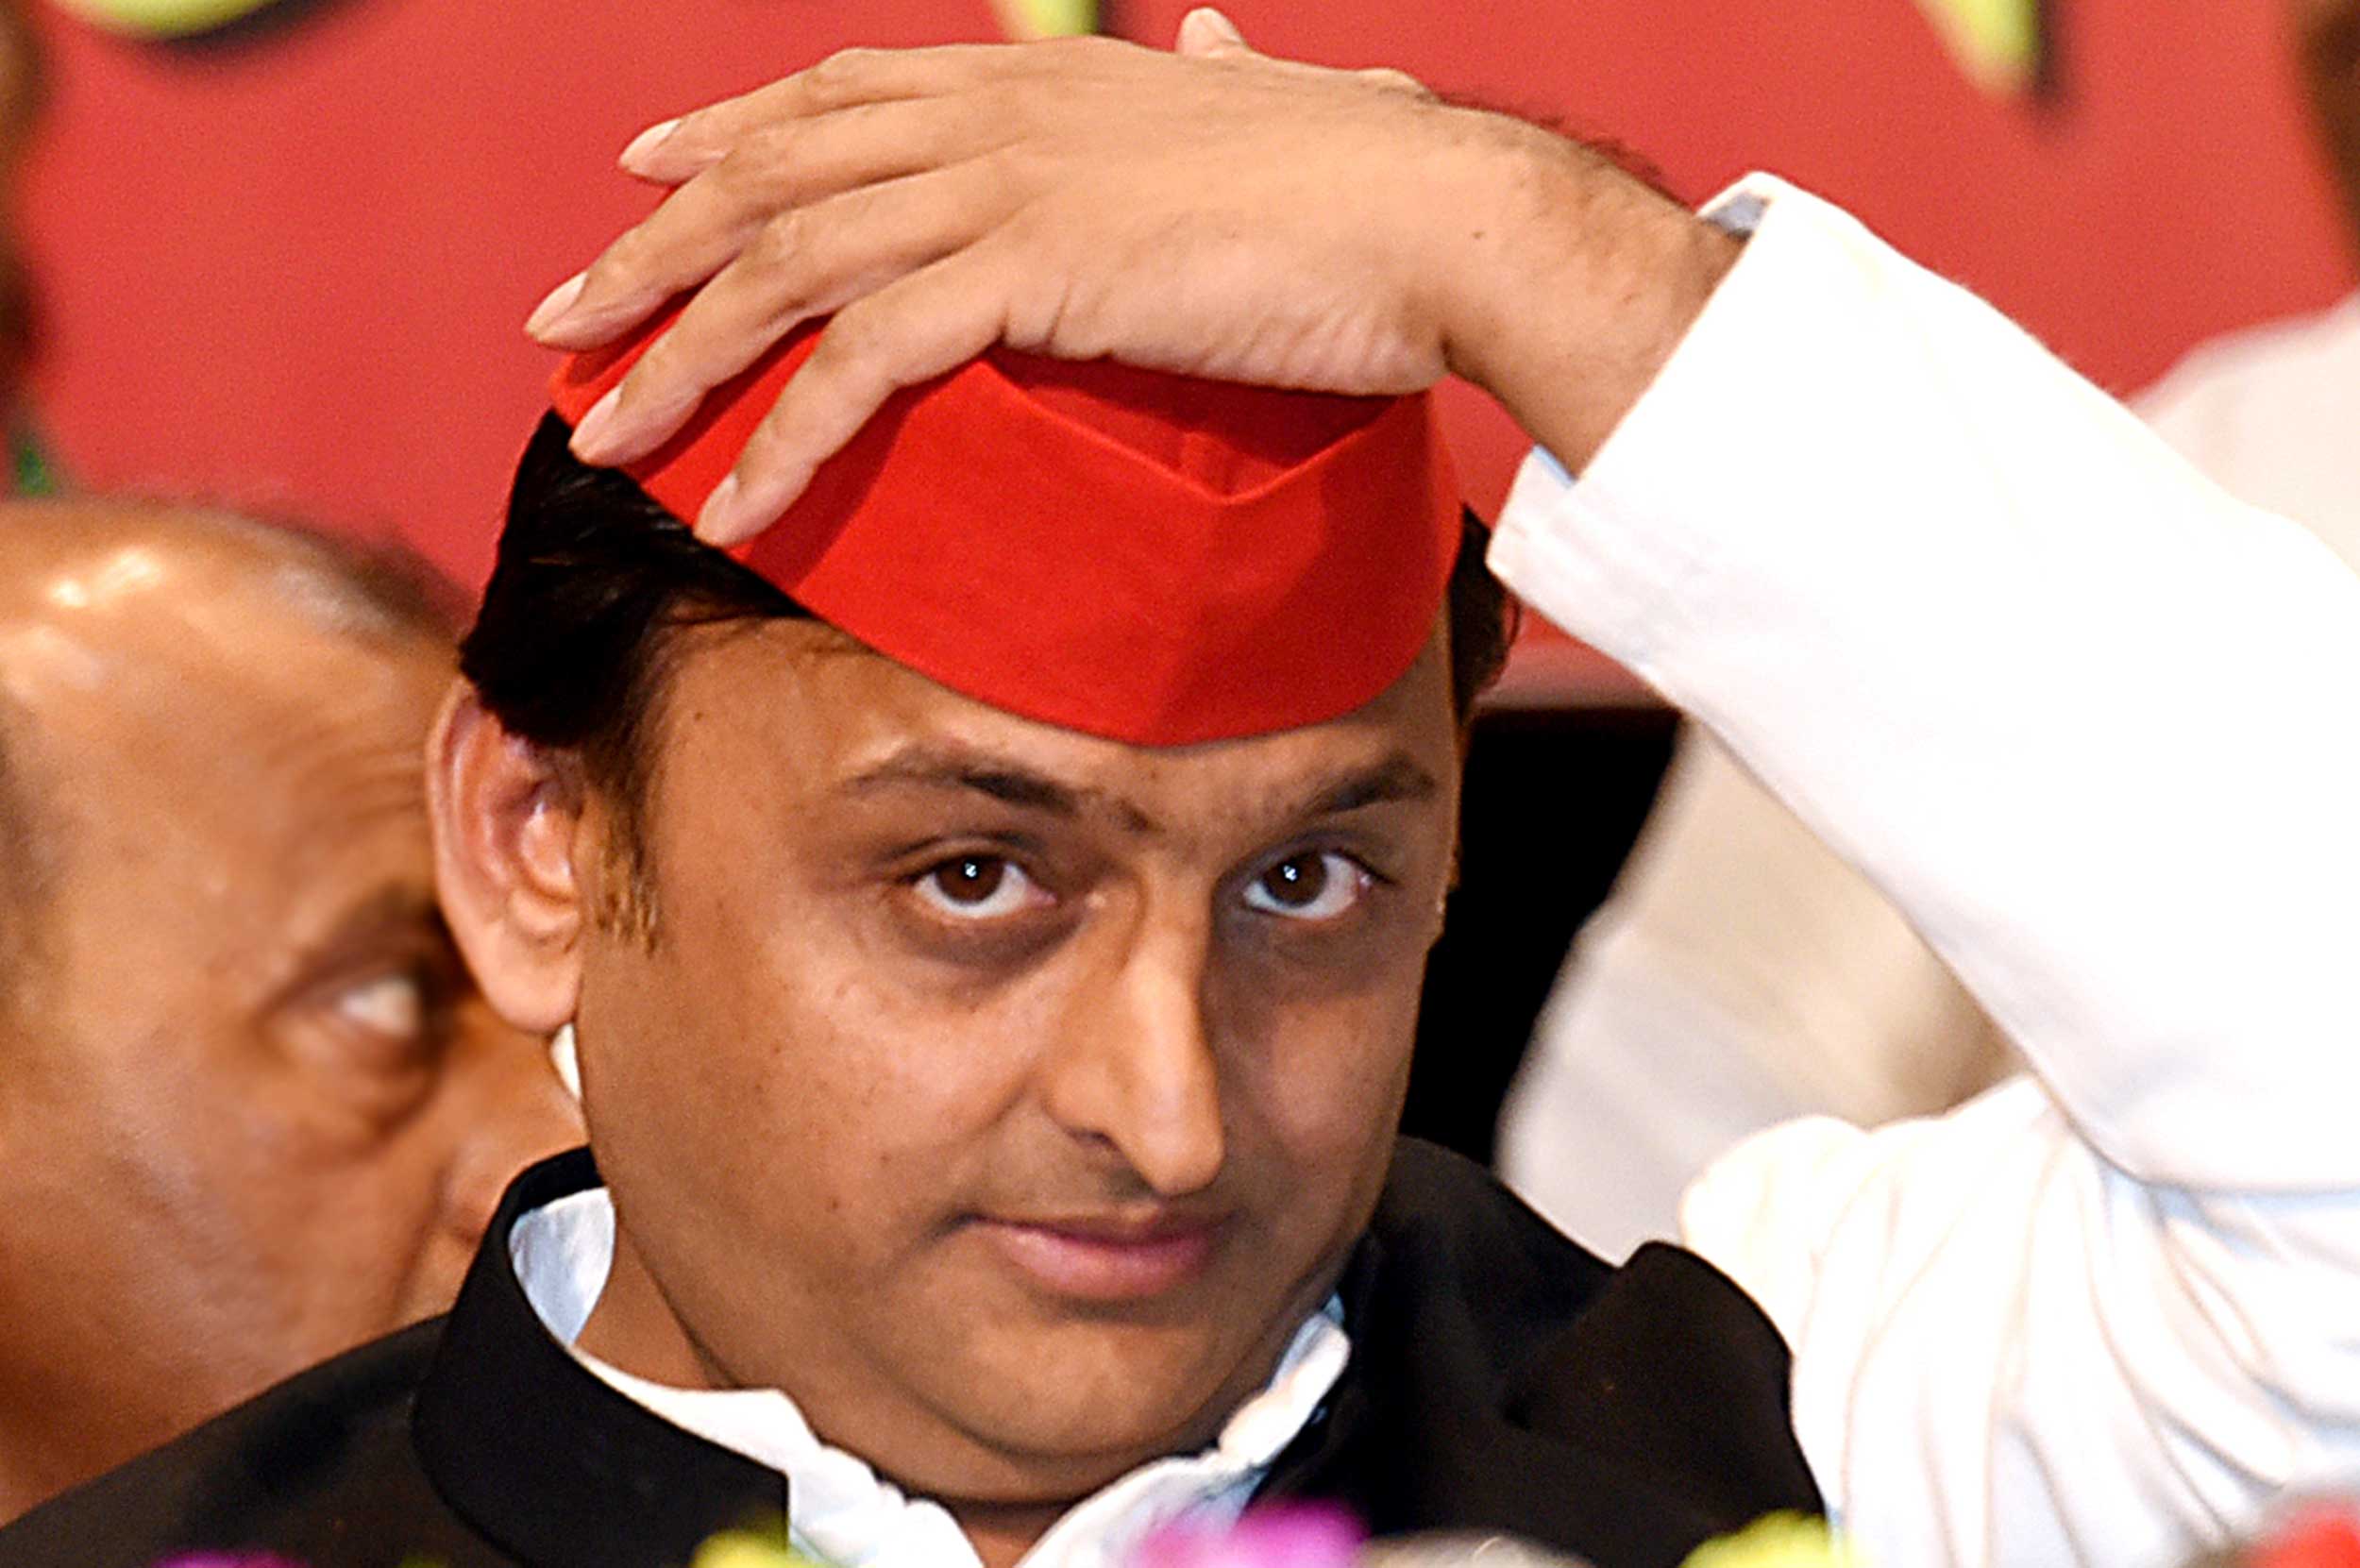 Replying to a question, Akhilesh Yadav (in picture) said: “My team is working on issues that are to be taken up. We will come out with a manifesto soon.”